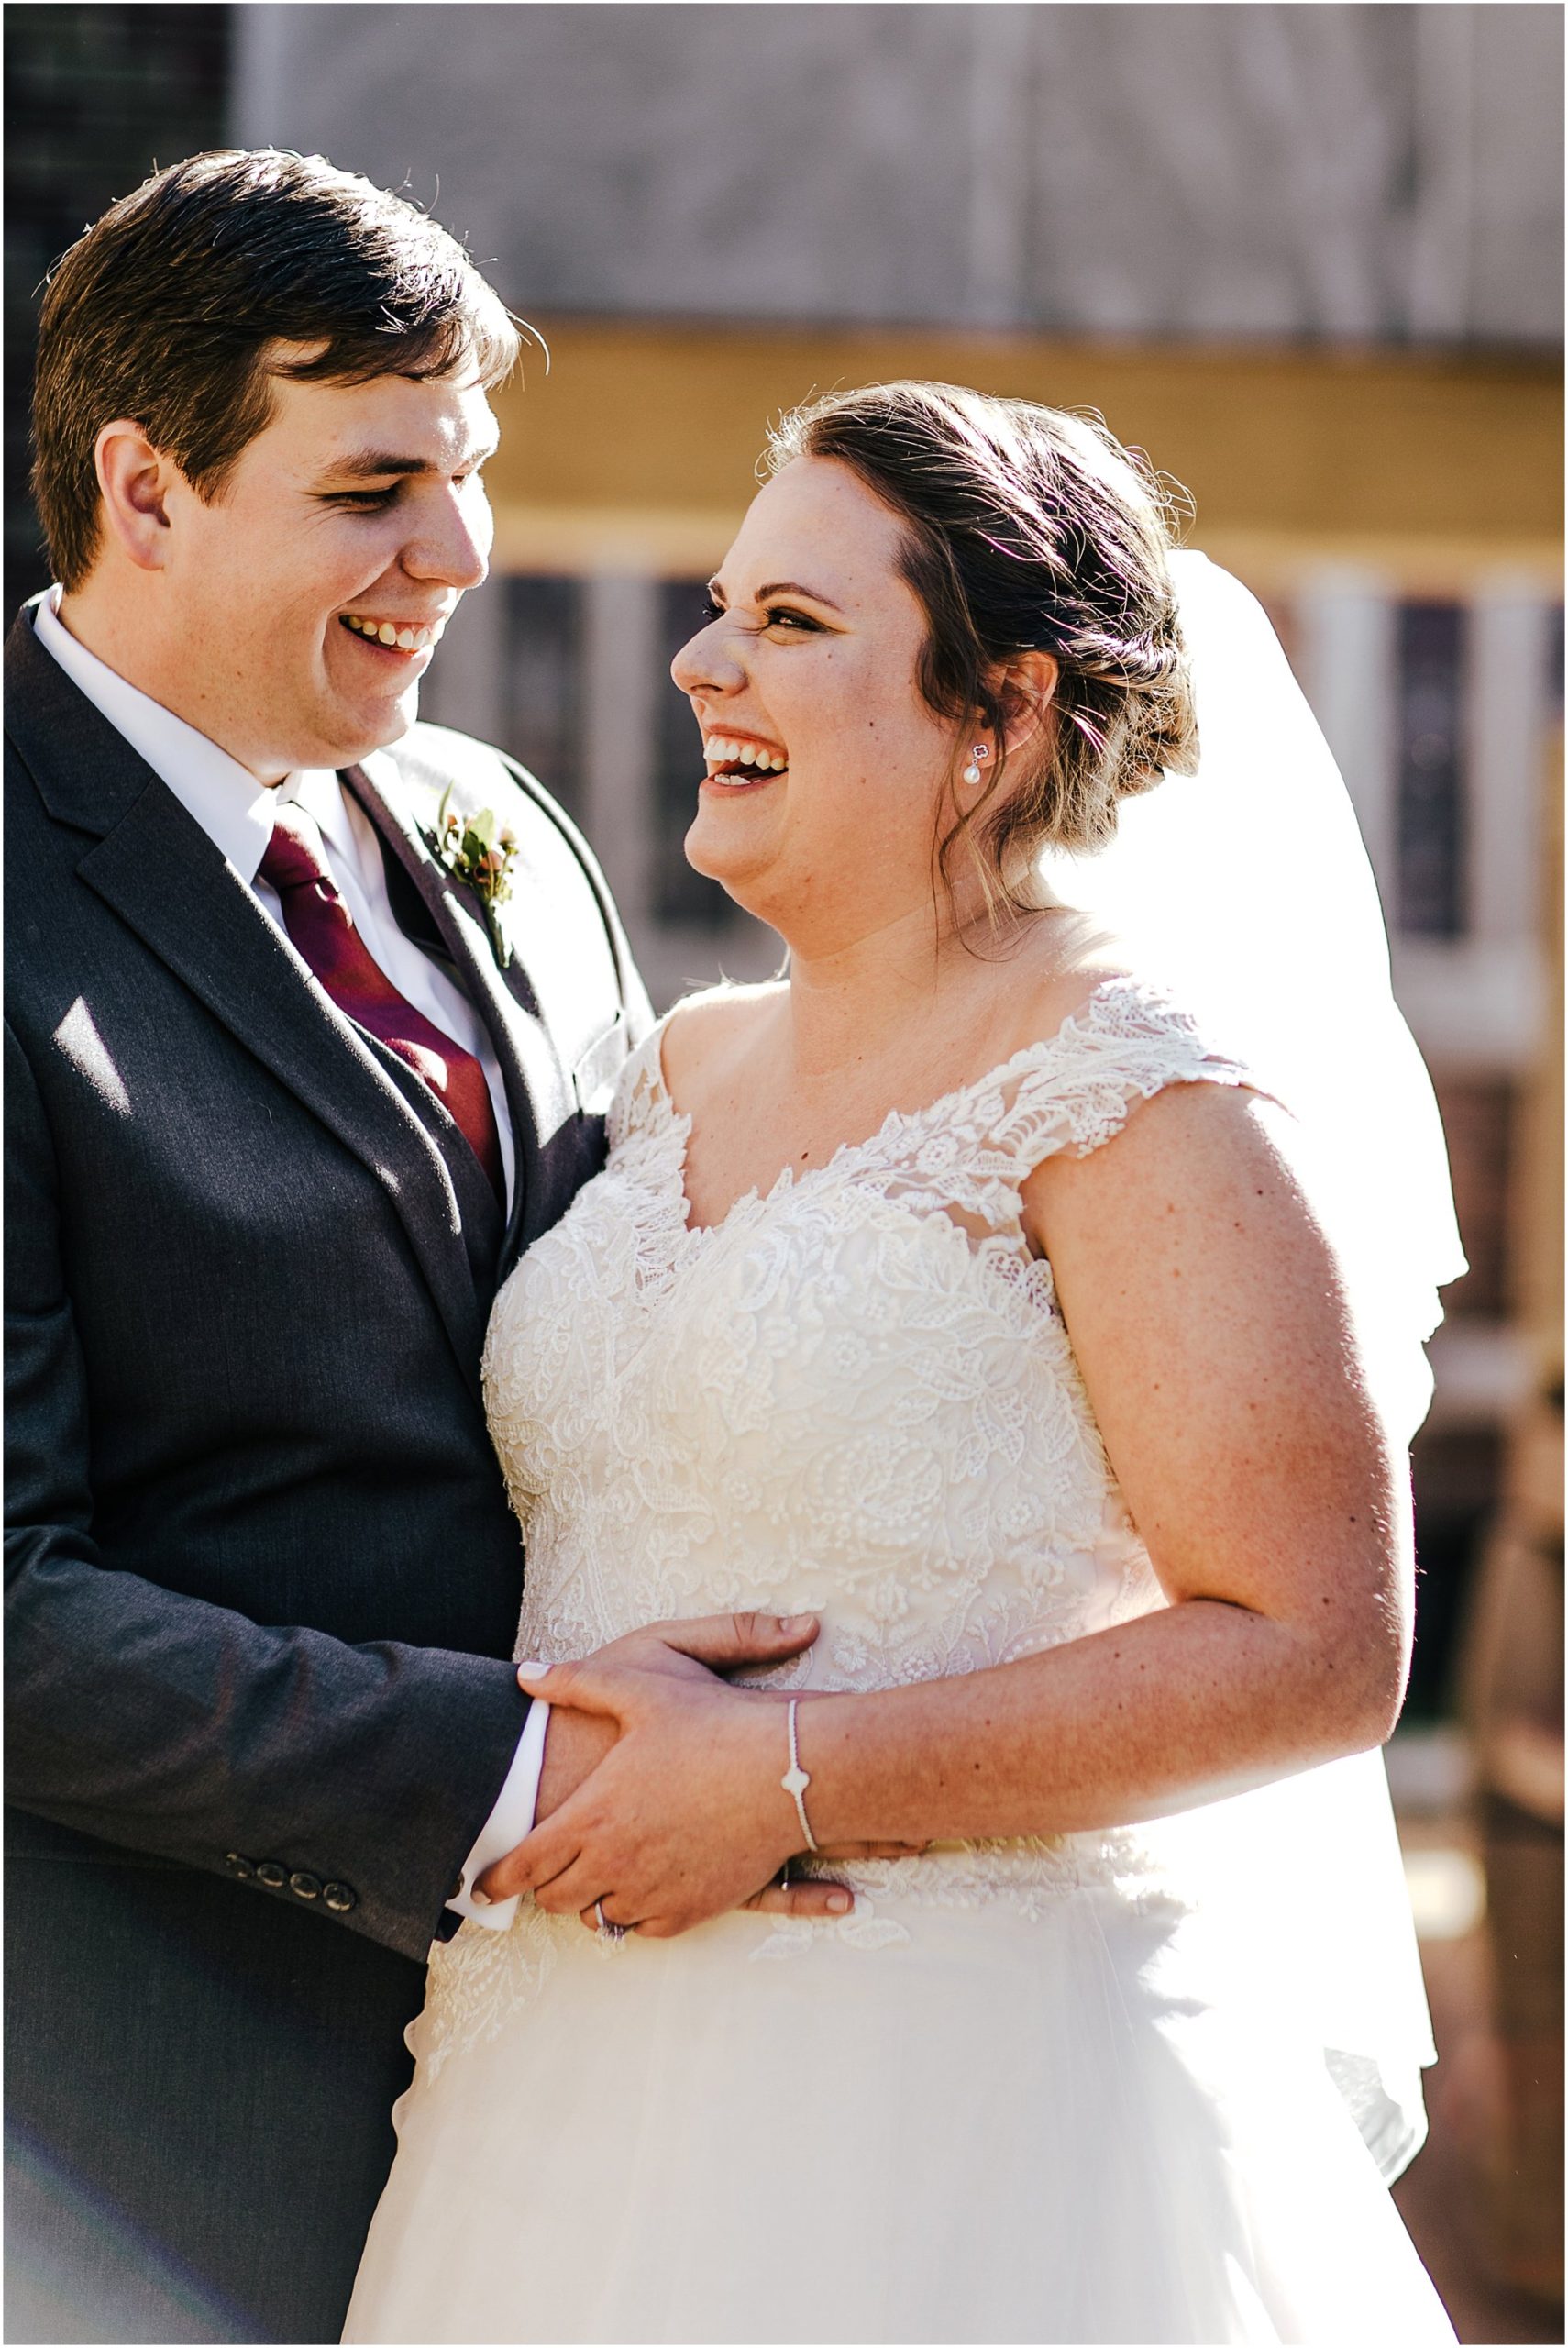 Adorable wedding couple embracing and laughing together outside of St. Luke's church in Memphis, Tn